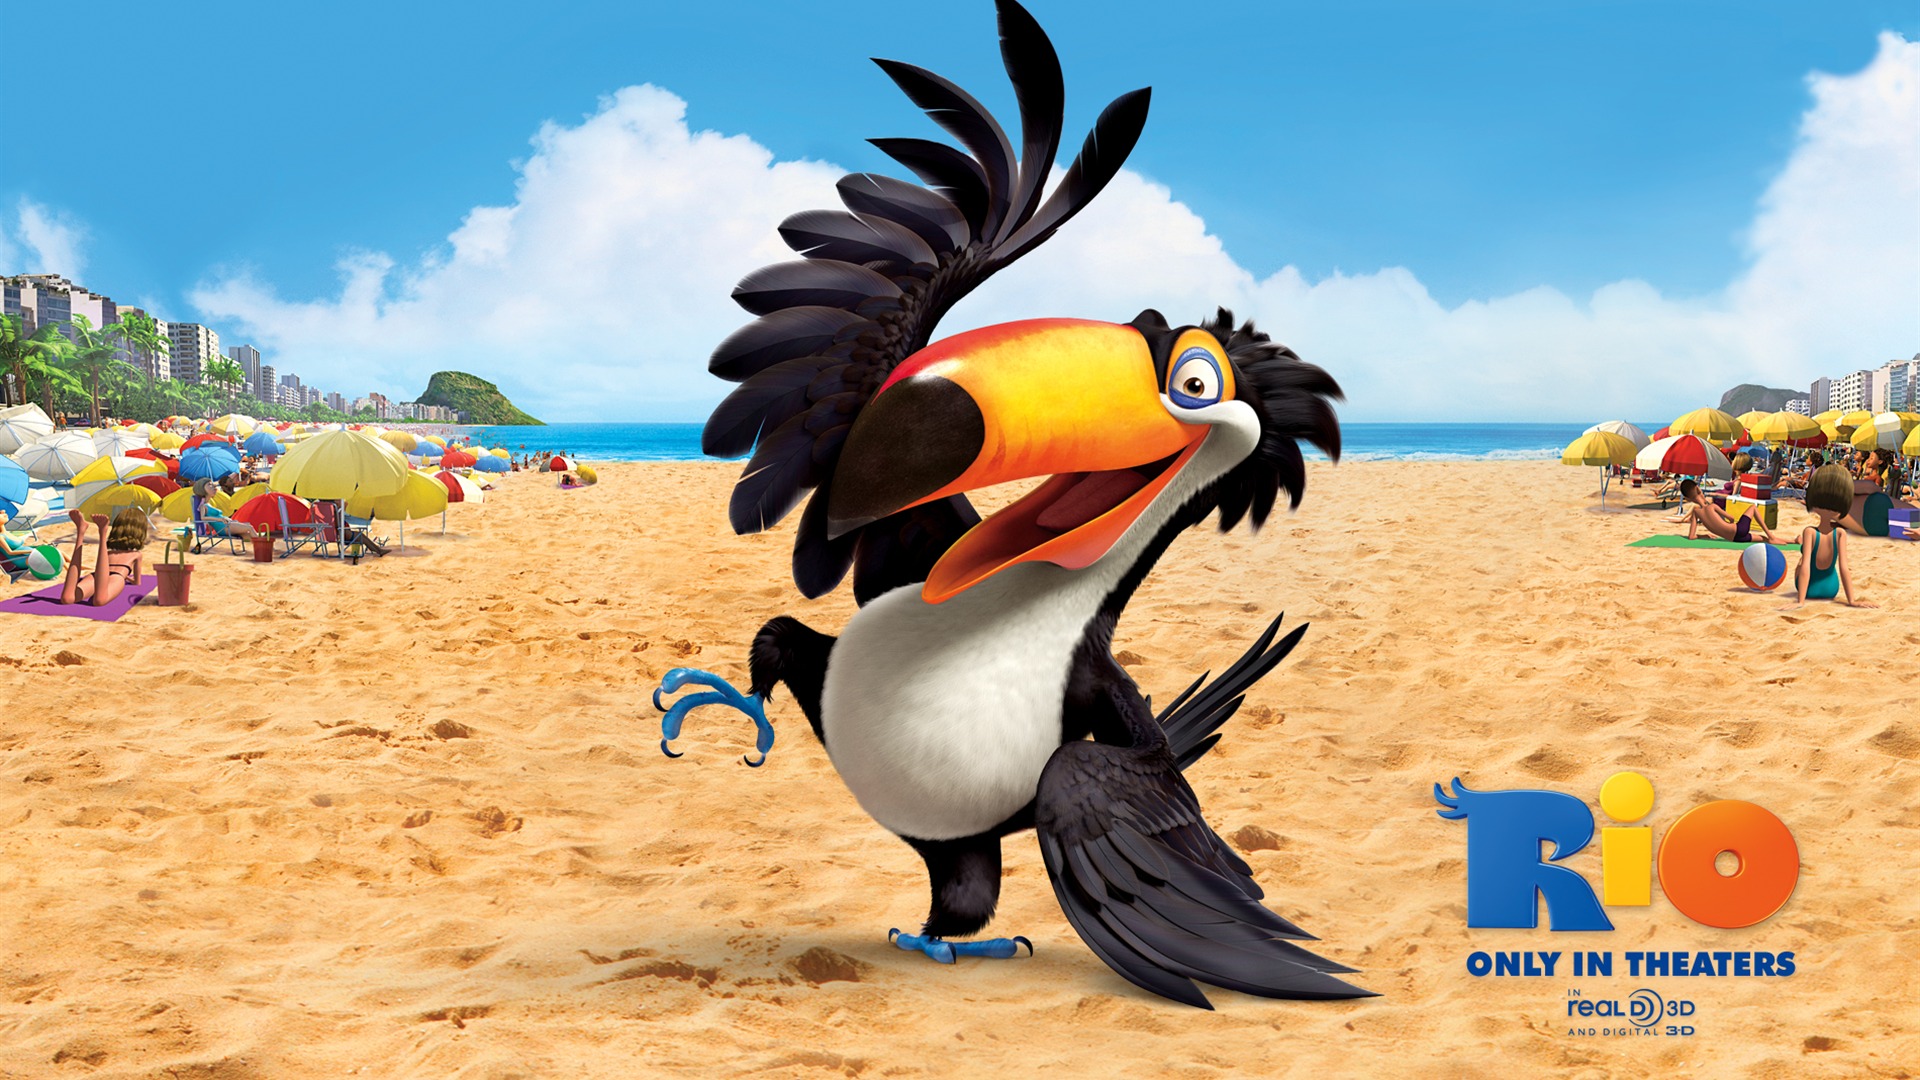 Rio 2011 wallpapers #18 - 1920x1080